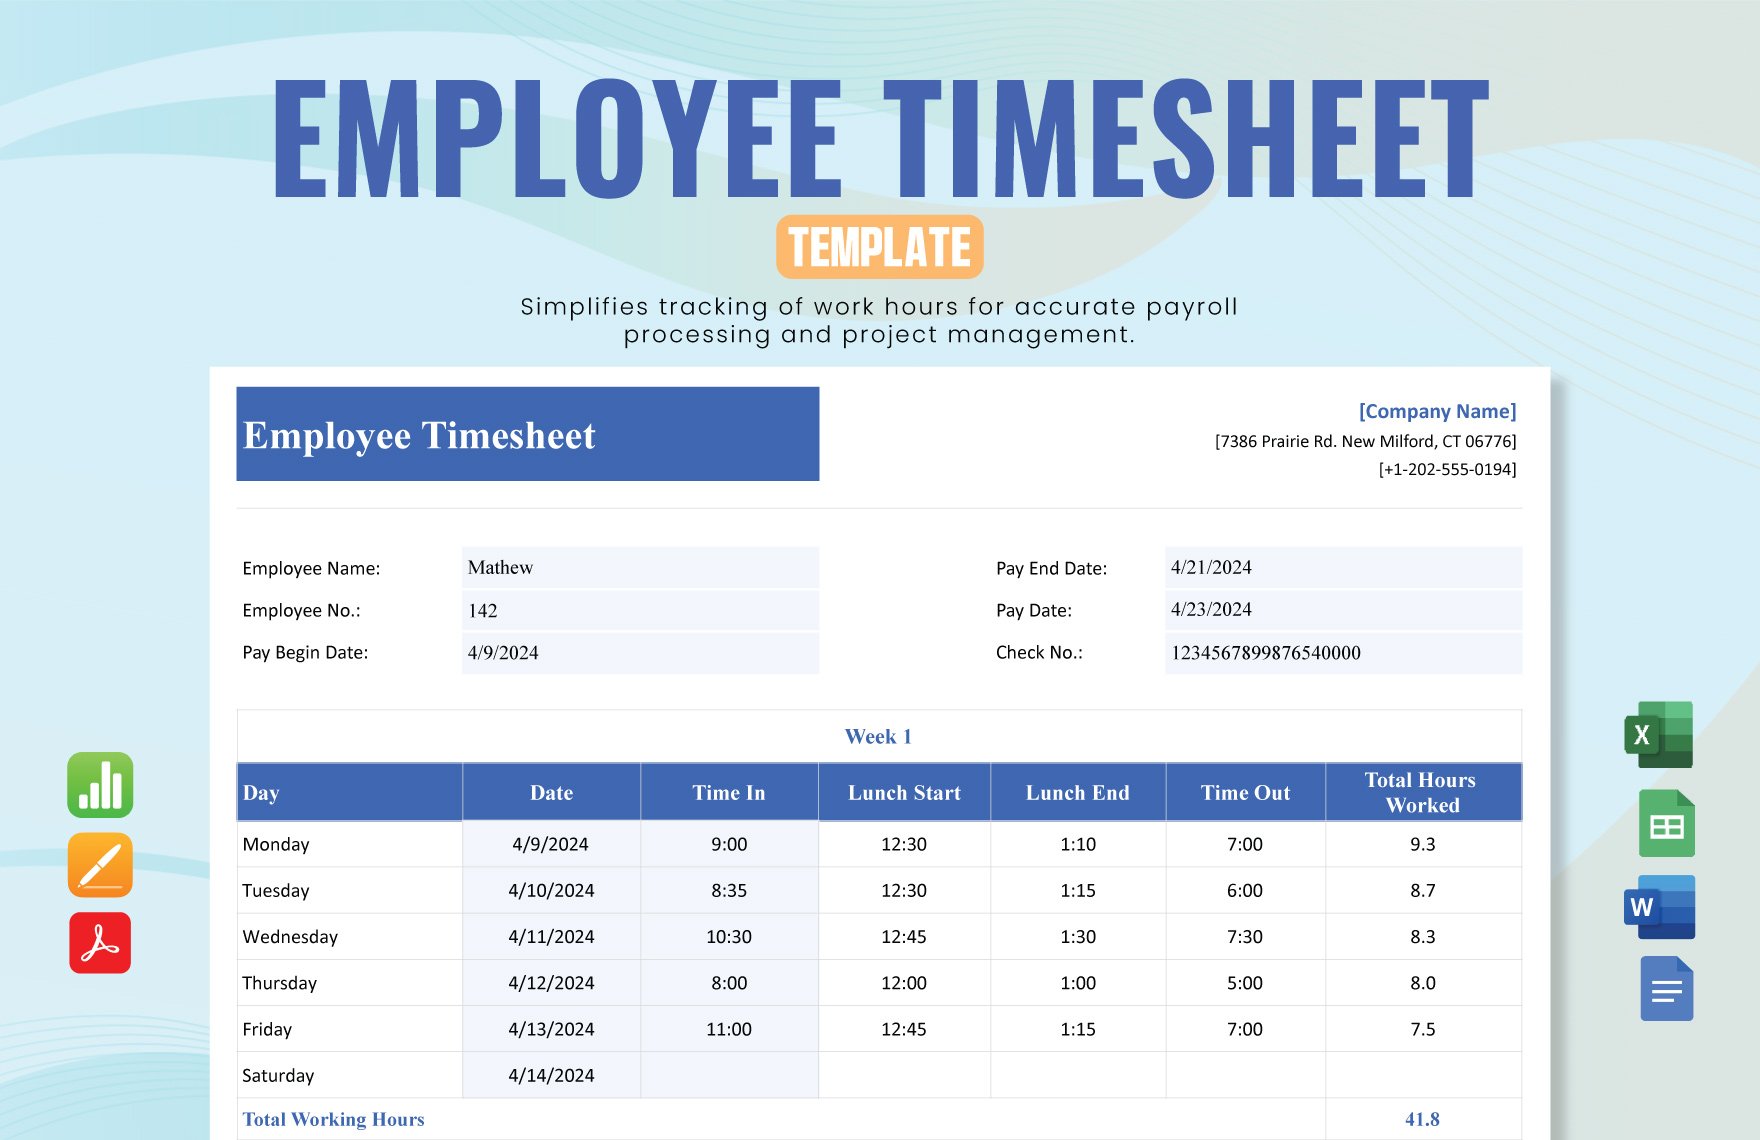 Free Employee Timesheet Template in Word, Google Docs, Excel, PDF, Google Sheets, Apple Pages, Apple Numbers